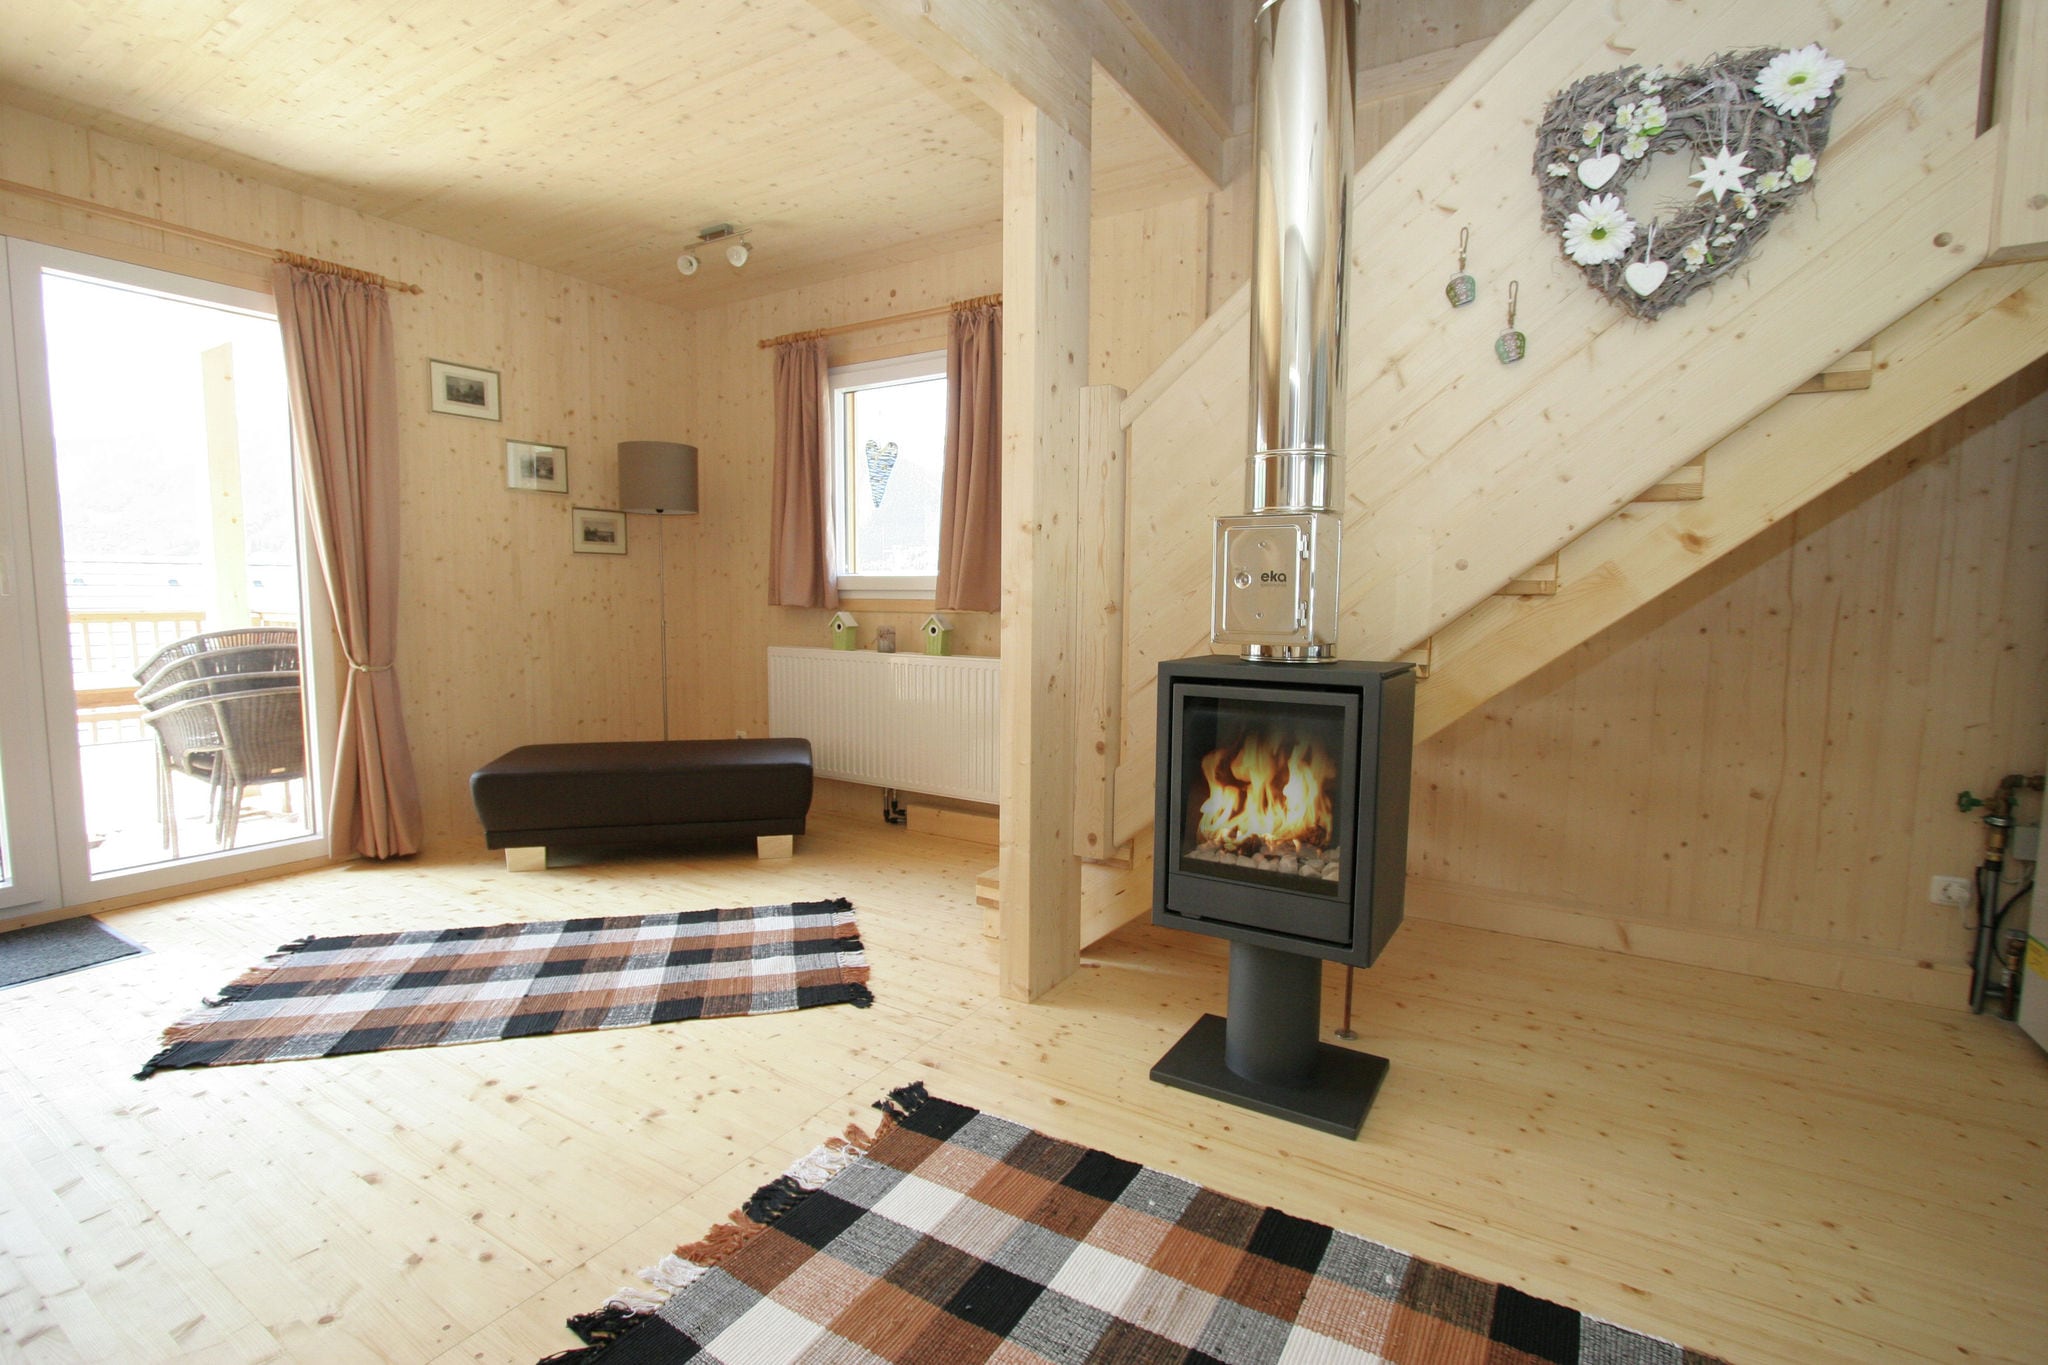 Chalet in Hohentauern with hot tub and sauna